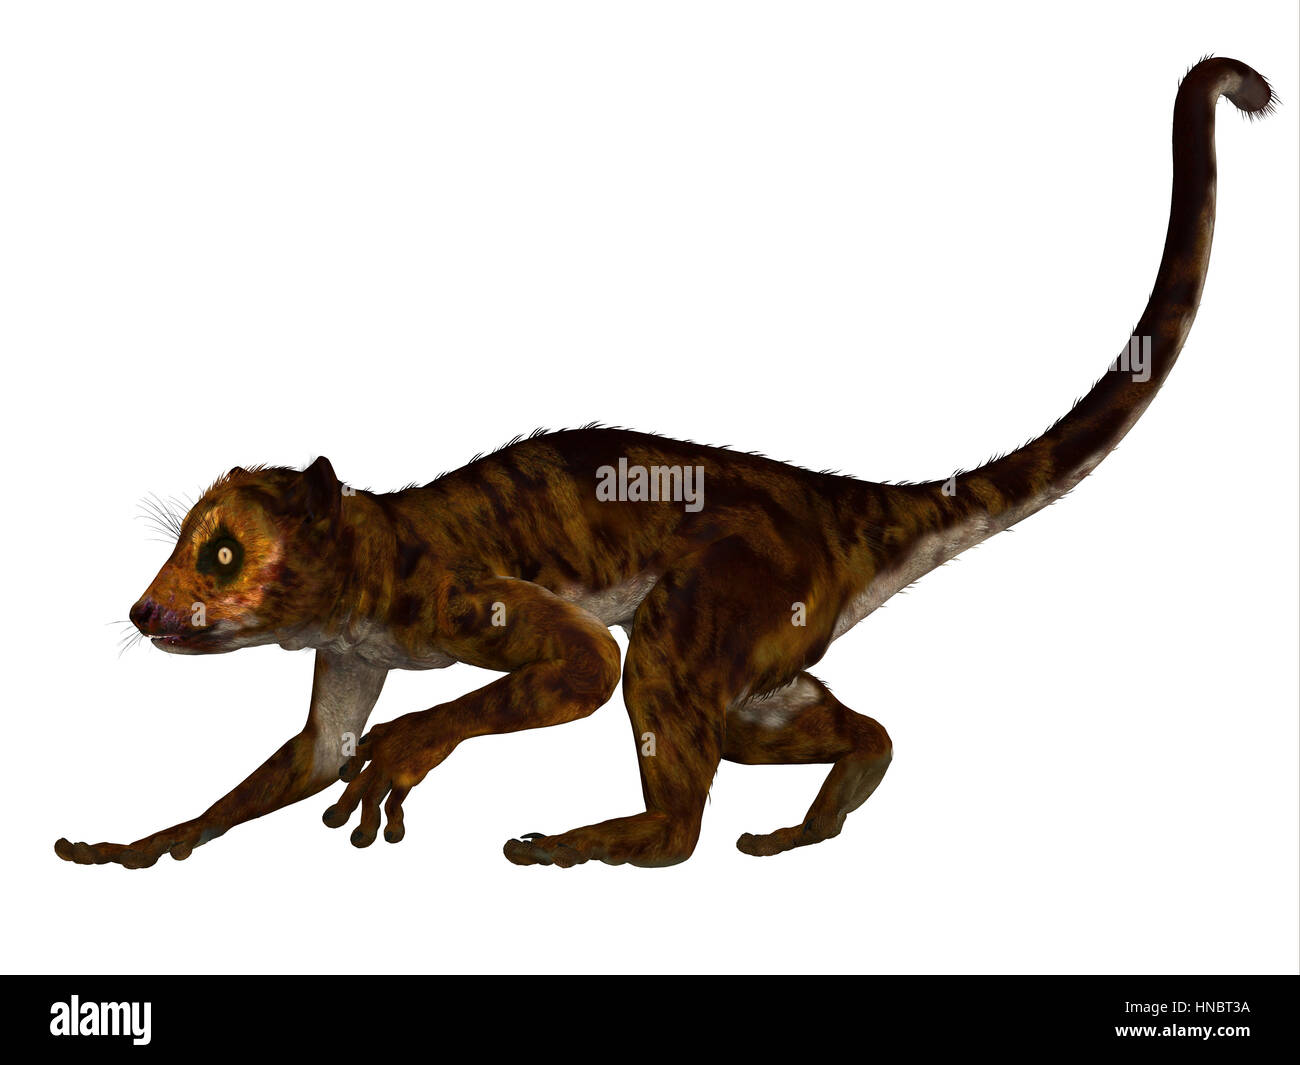 Darwinius is lemur-like early primate that lived in the Eocene Period in Germany. Stock Photo